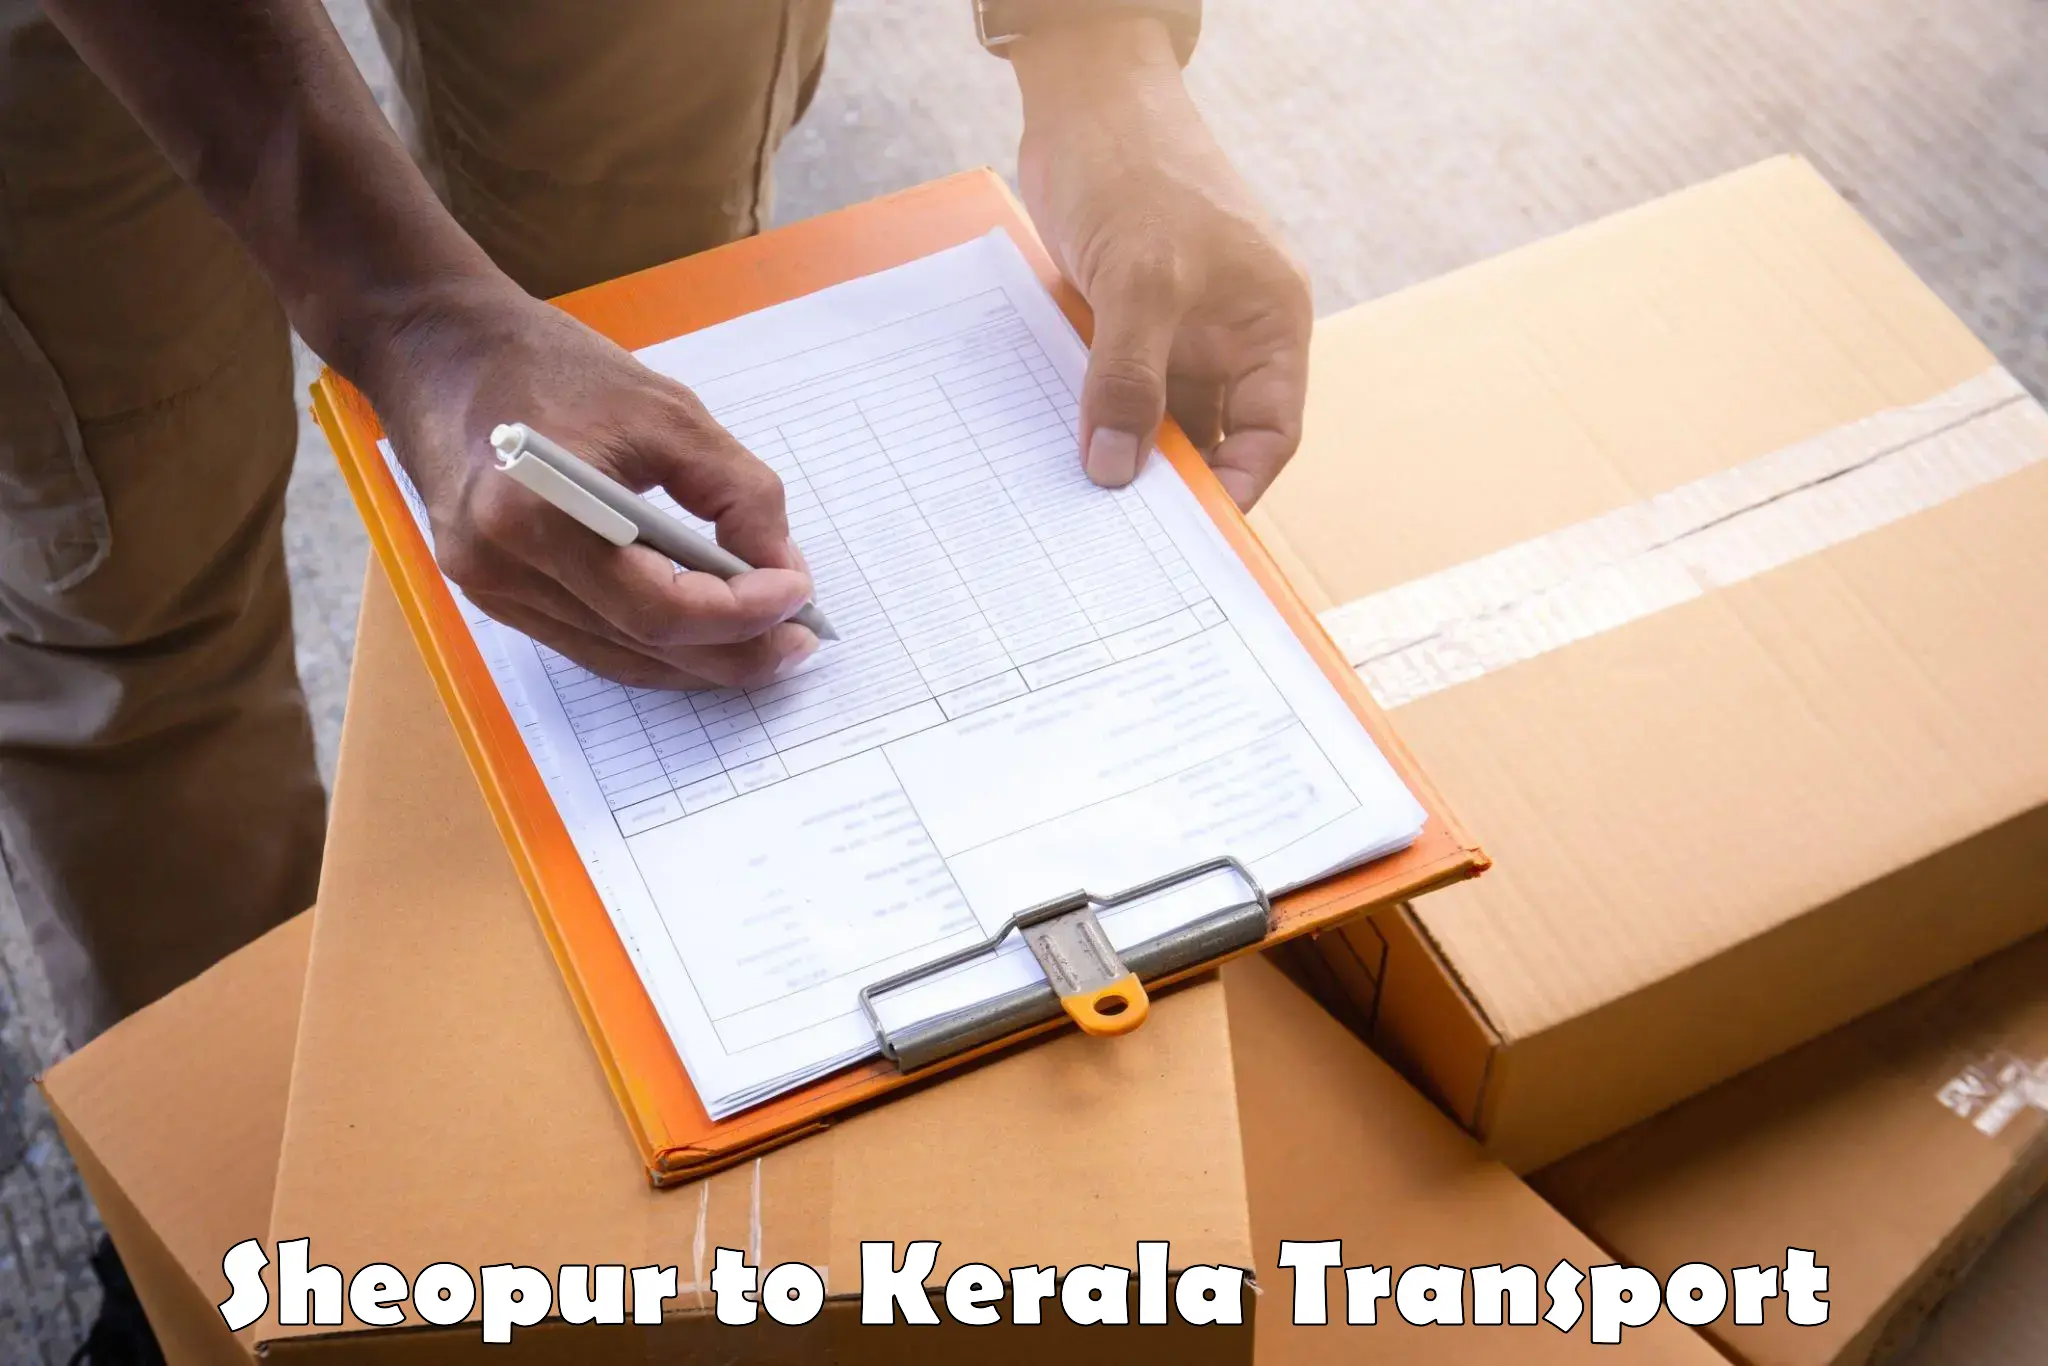 Vehicle transport services Sheopur to Cochin Port Kochi